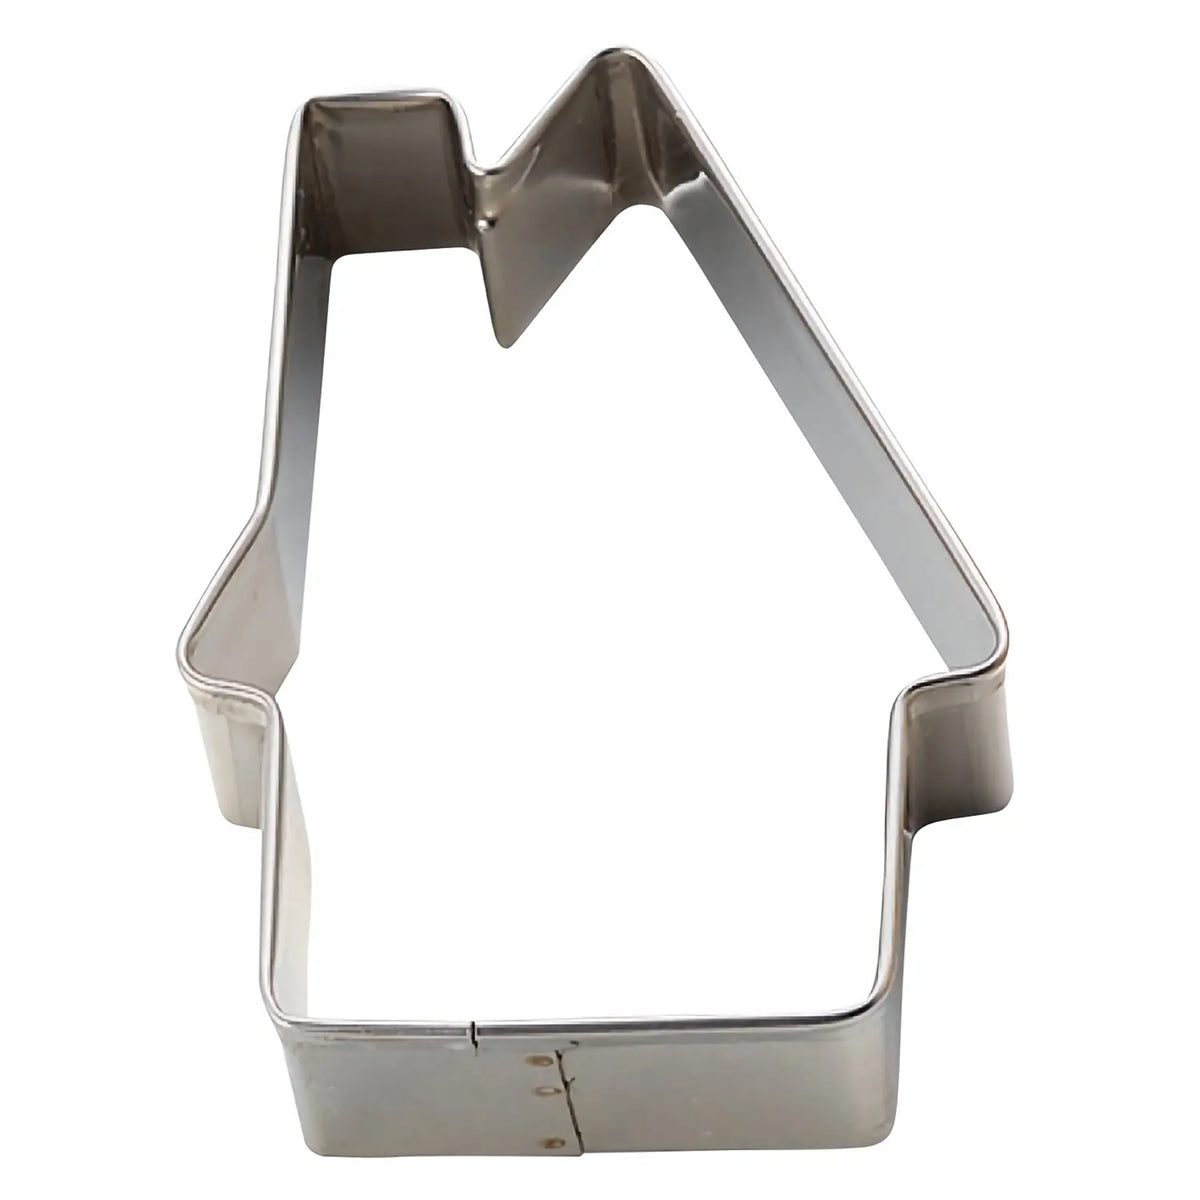 TIGERCROWN Cake Land Stainless Steel Cookie Cutter House